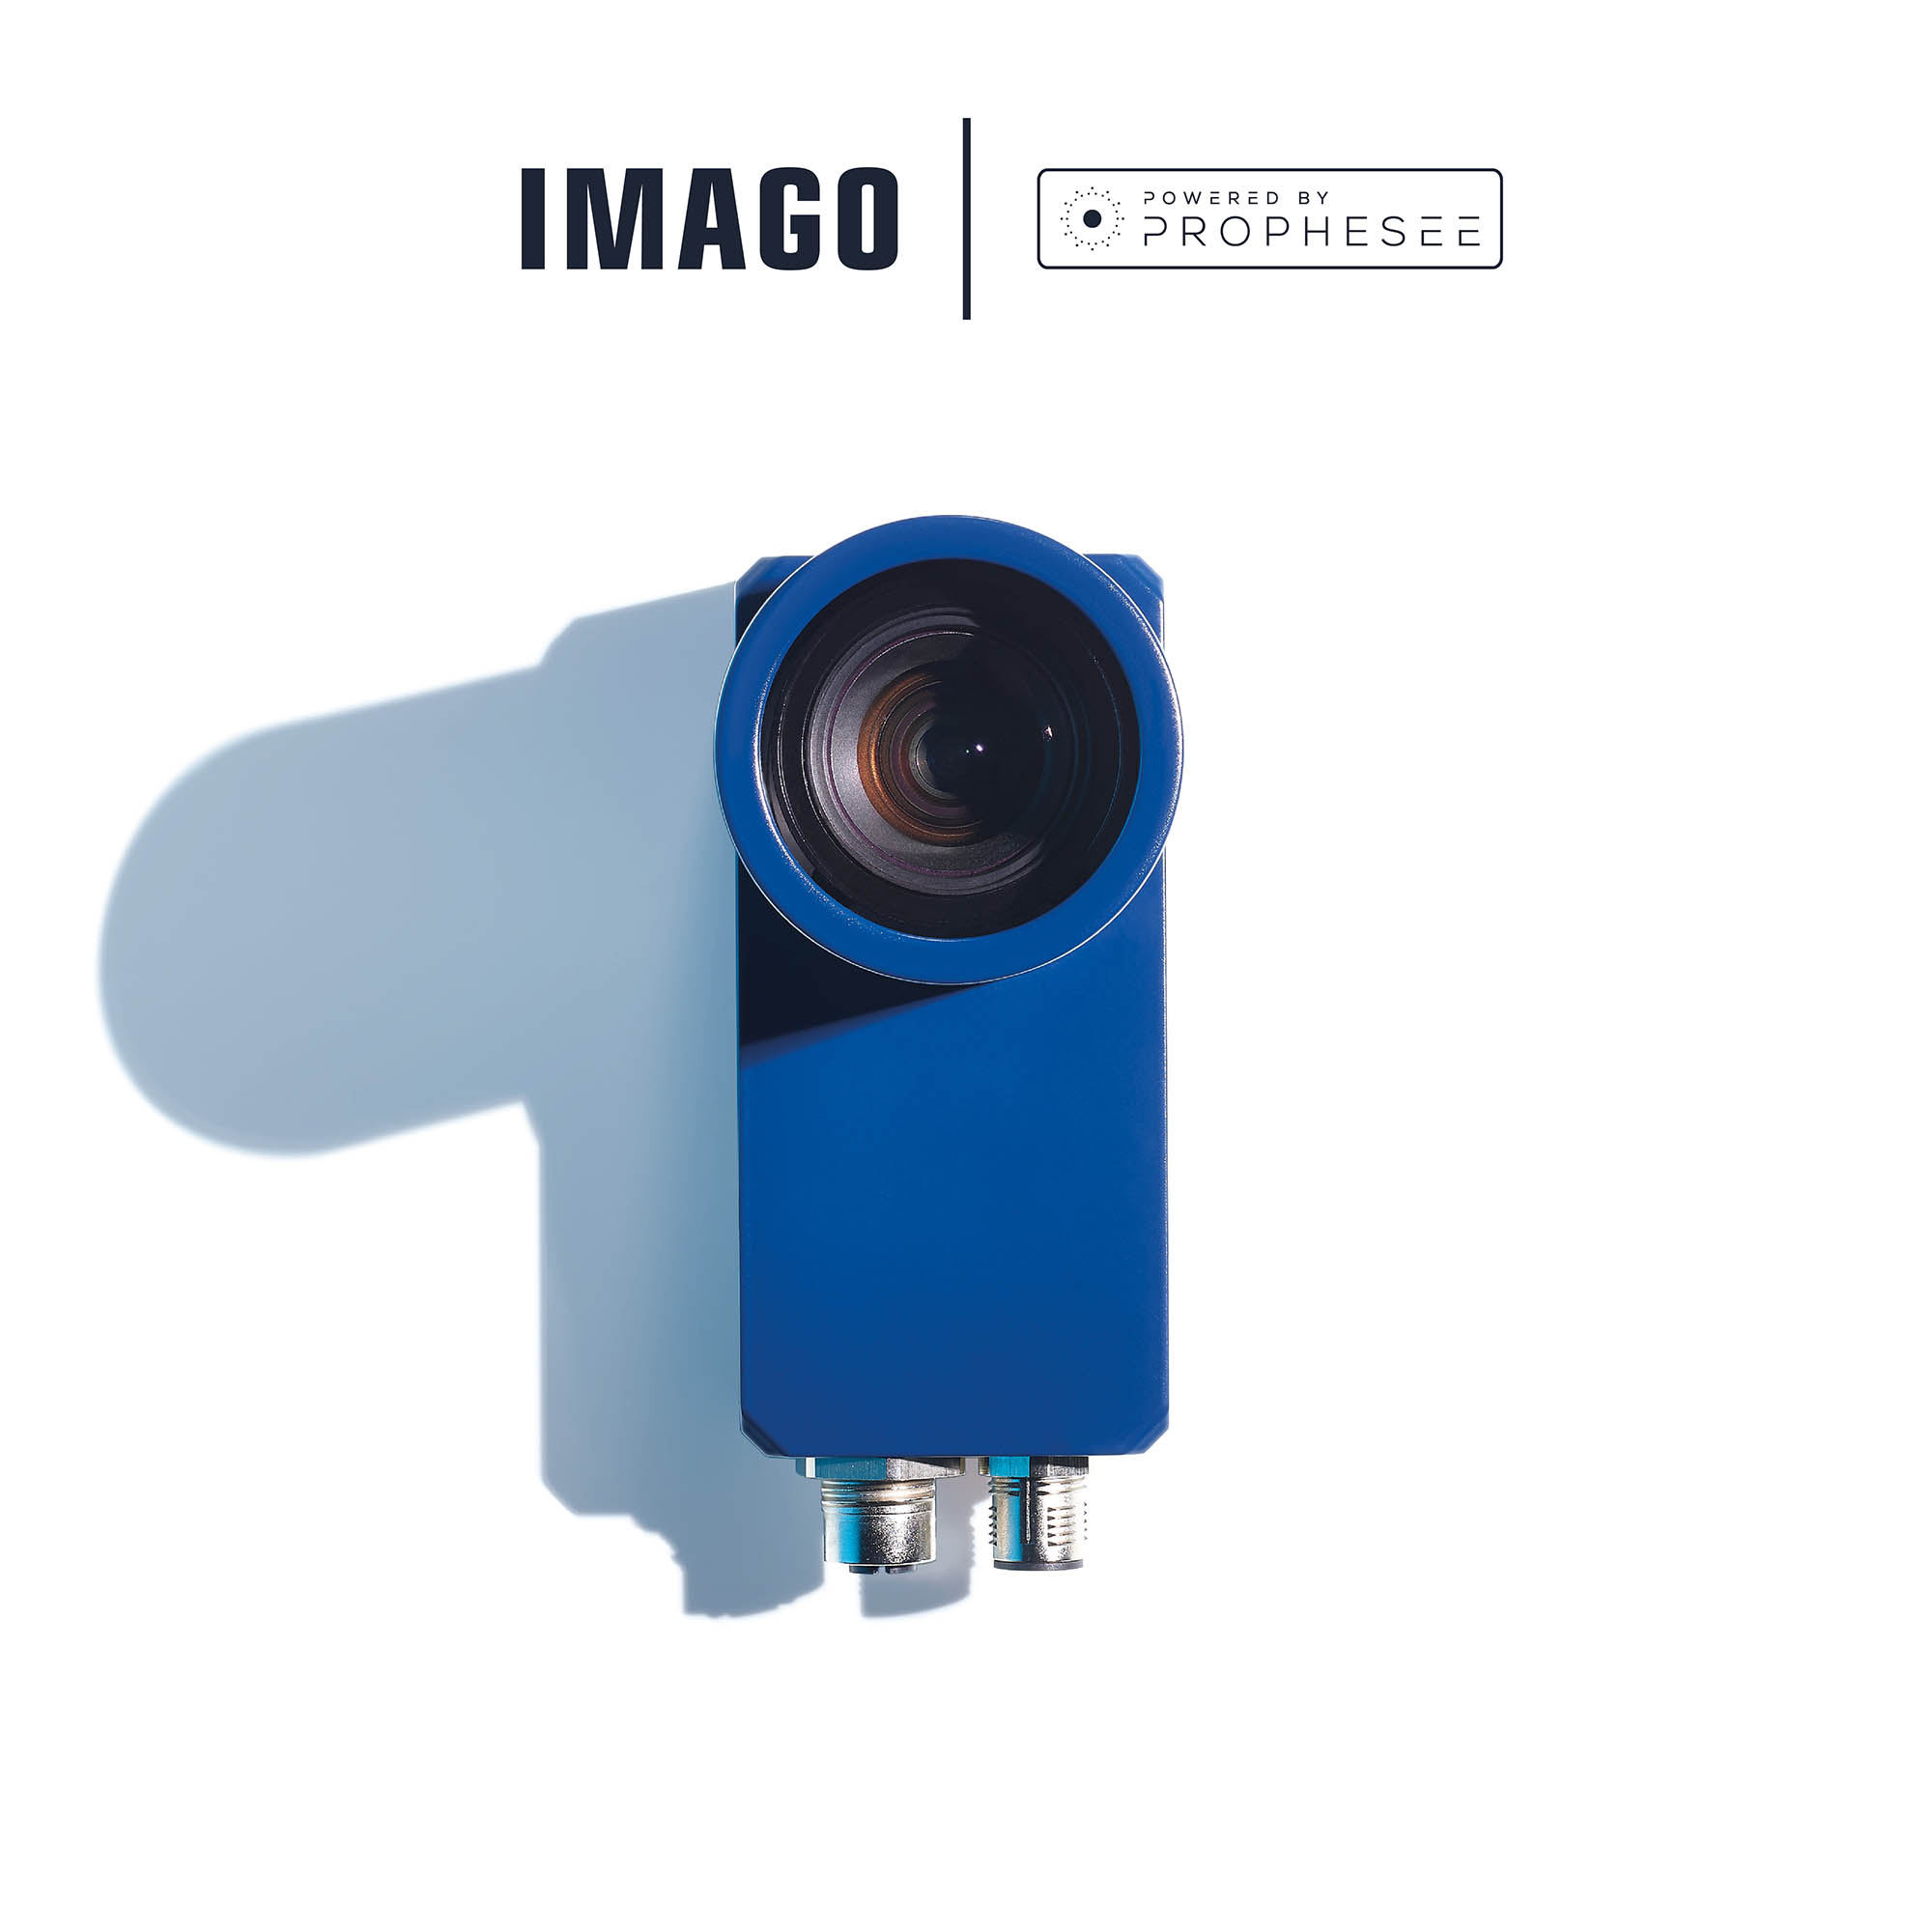 Imago I Event Camera Powered by Prophesee 